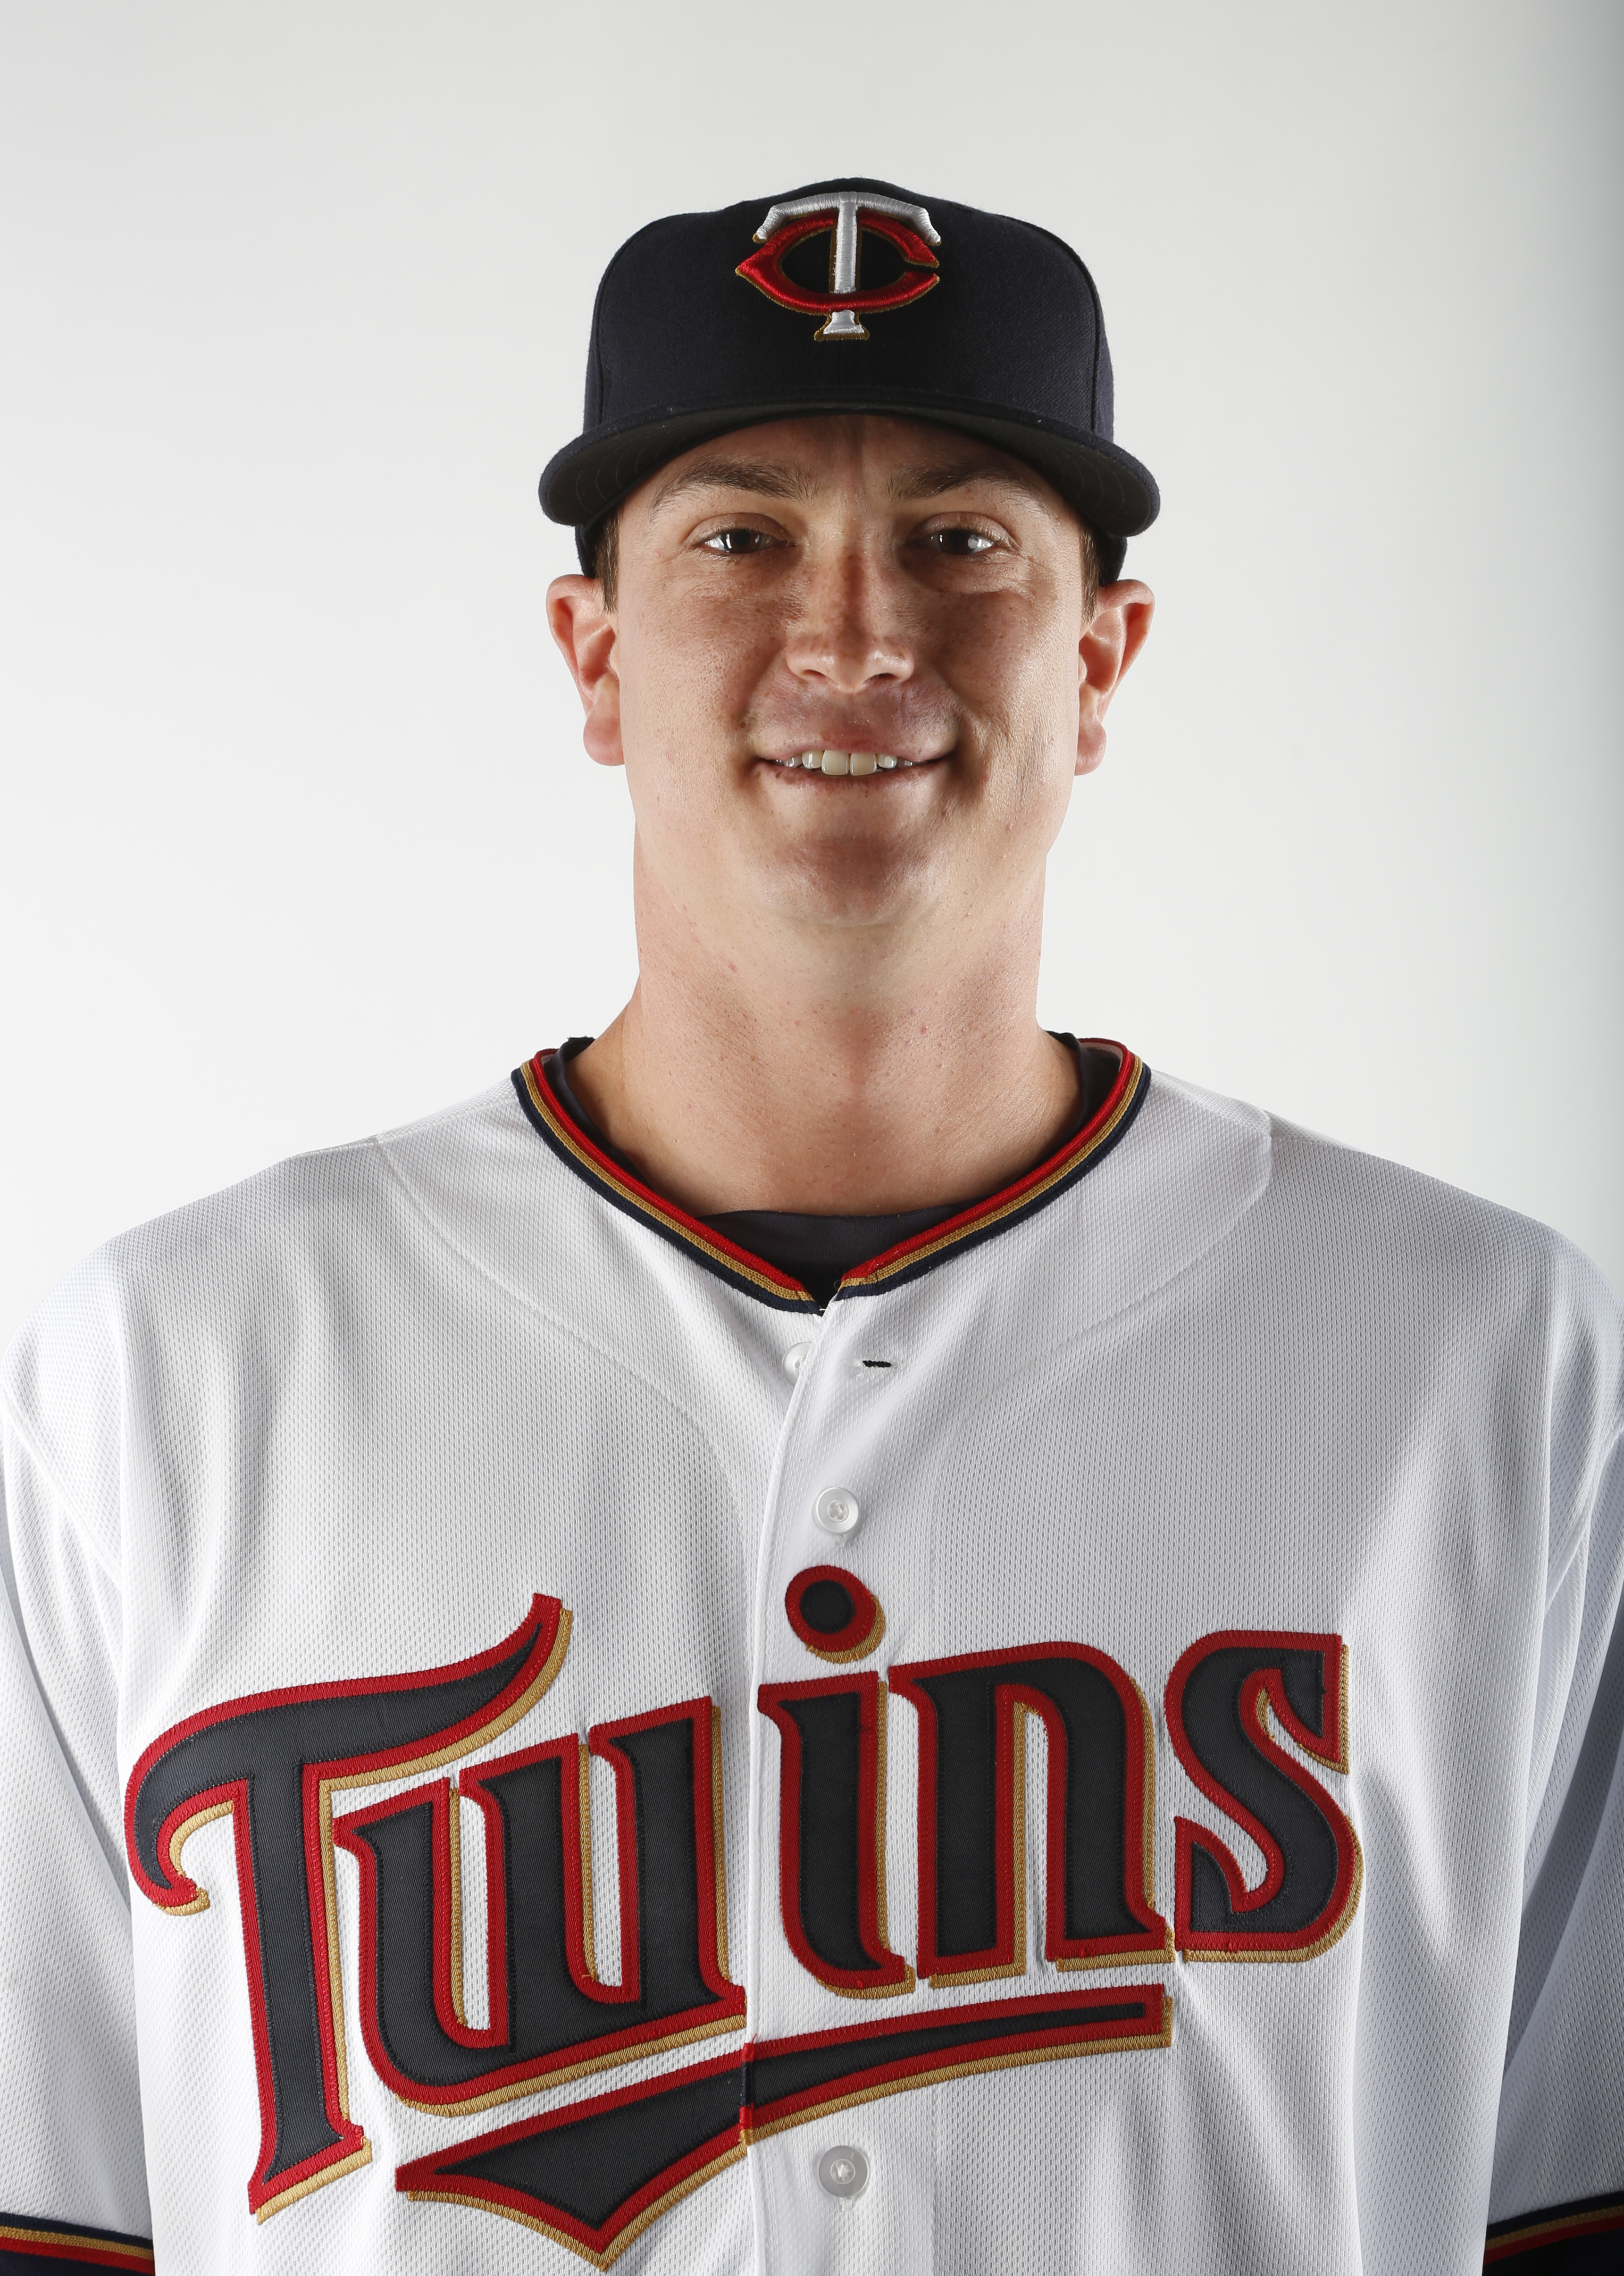 FORT MYERS, FL - MARCH 3:  Kyle Gibson #44 of the Minnesota Twins poses for a photo on March 3, 2015 at Hammond Stadium in Fort Myers, Florida.  (Photo by Brian Blanco/Getty Images)